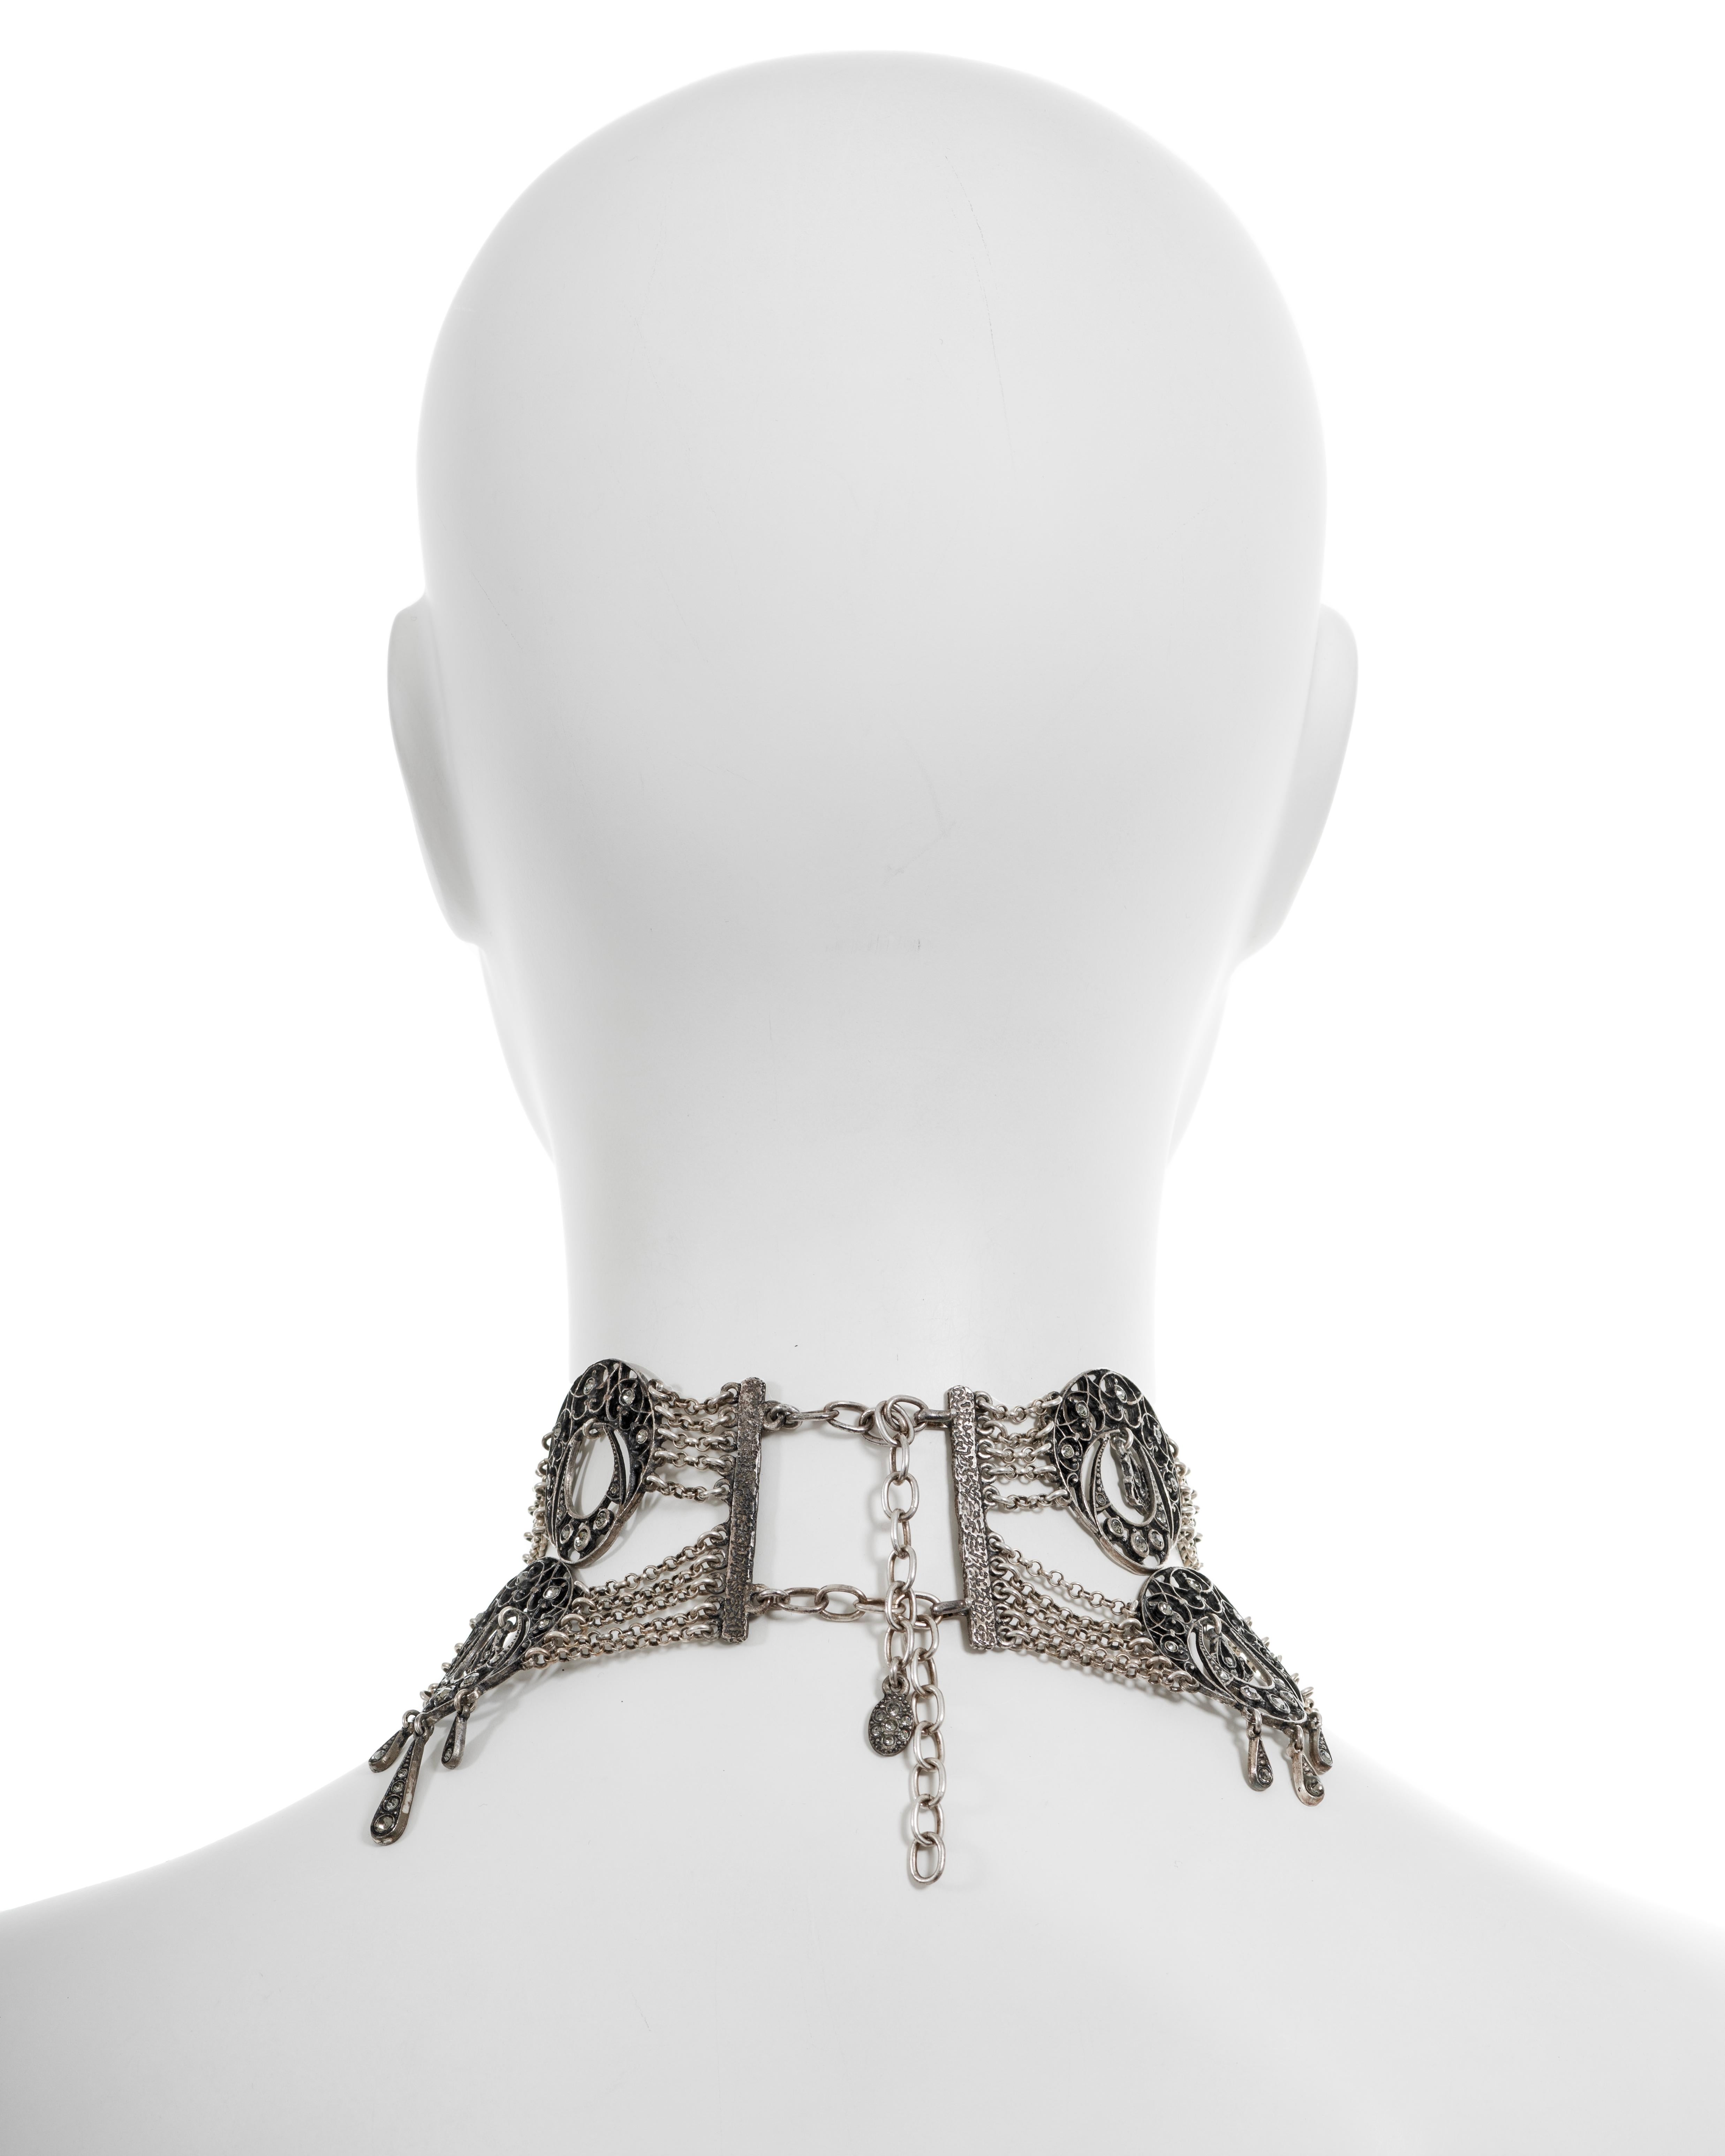 Christian Dior by John Galliano antique-style filigree choker necklace, ss 1999 For Sale 2